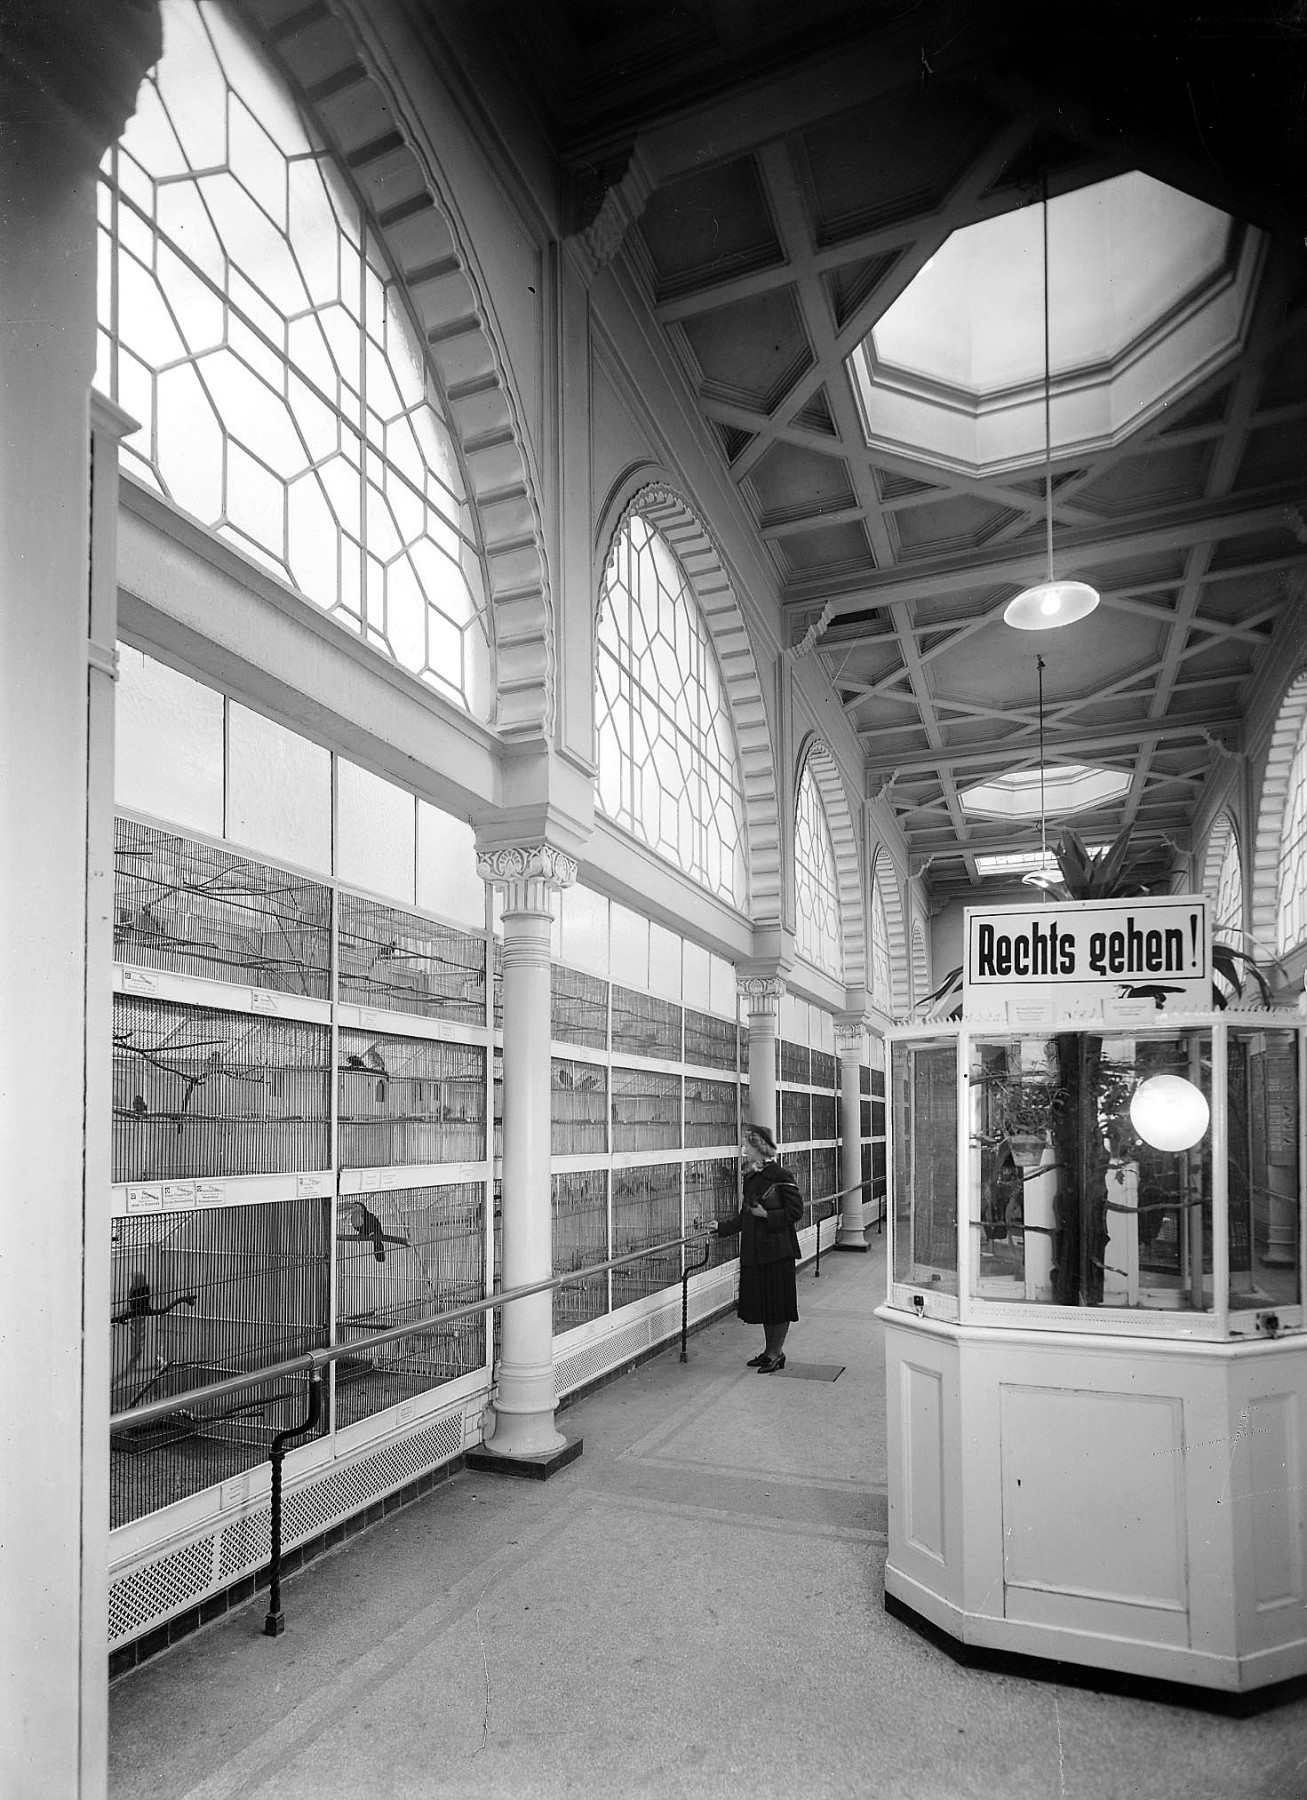 A high, narrow building with skylights, large arched windows, and decorative columns. The wall on the left is covered in rows of bird cages. There is a hexagonal booth at the right of the image with a large sign that says, “Keep right!” A lone woman stands before the wall of cages with her hand on a railing that also serves as a barrier.